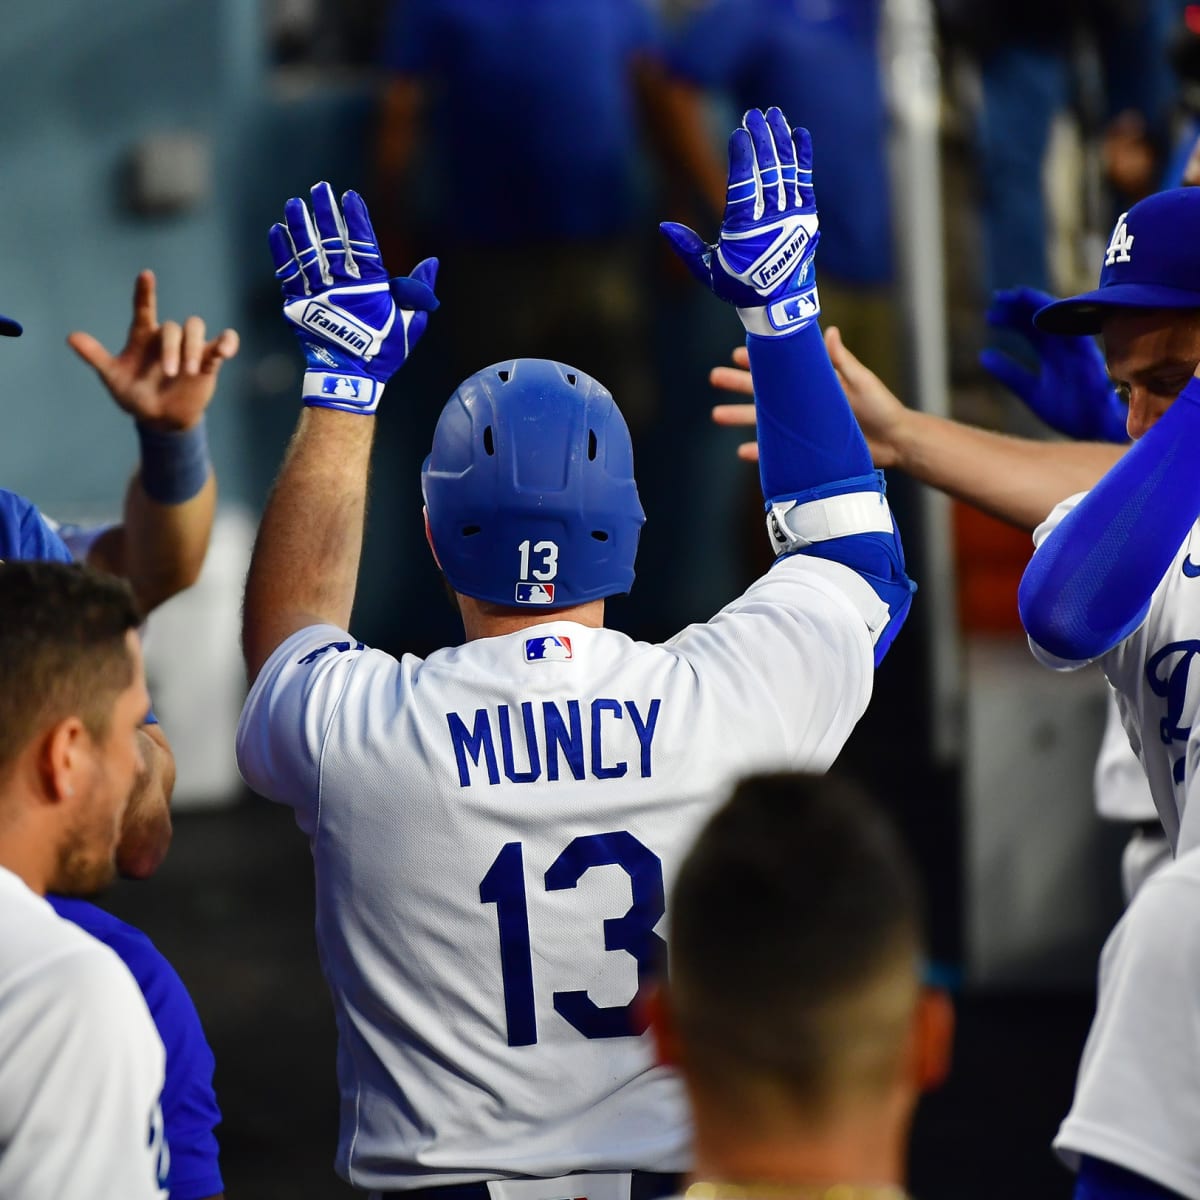 Let's overreact to Max Muncy's historically bad Opening Day for the Dodgers!